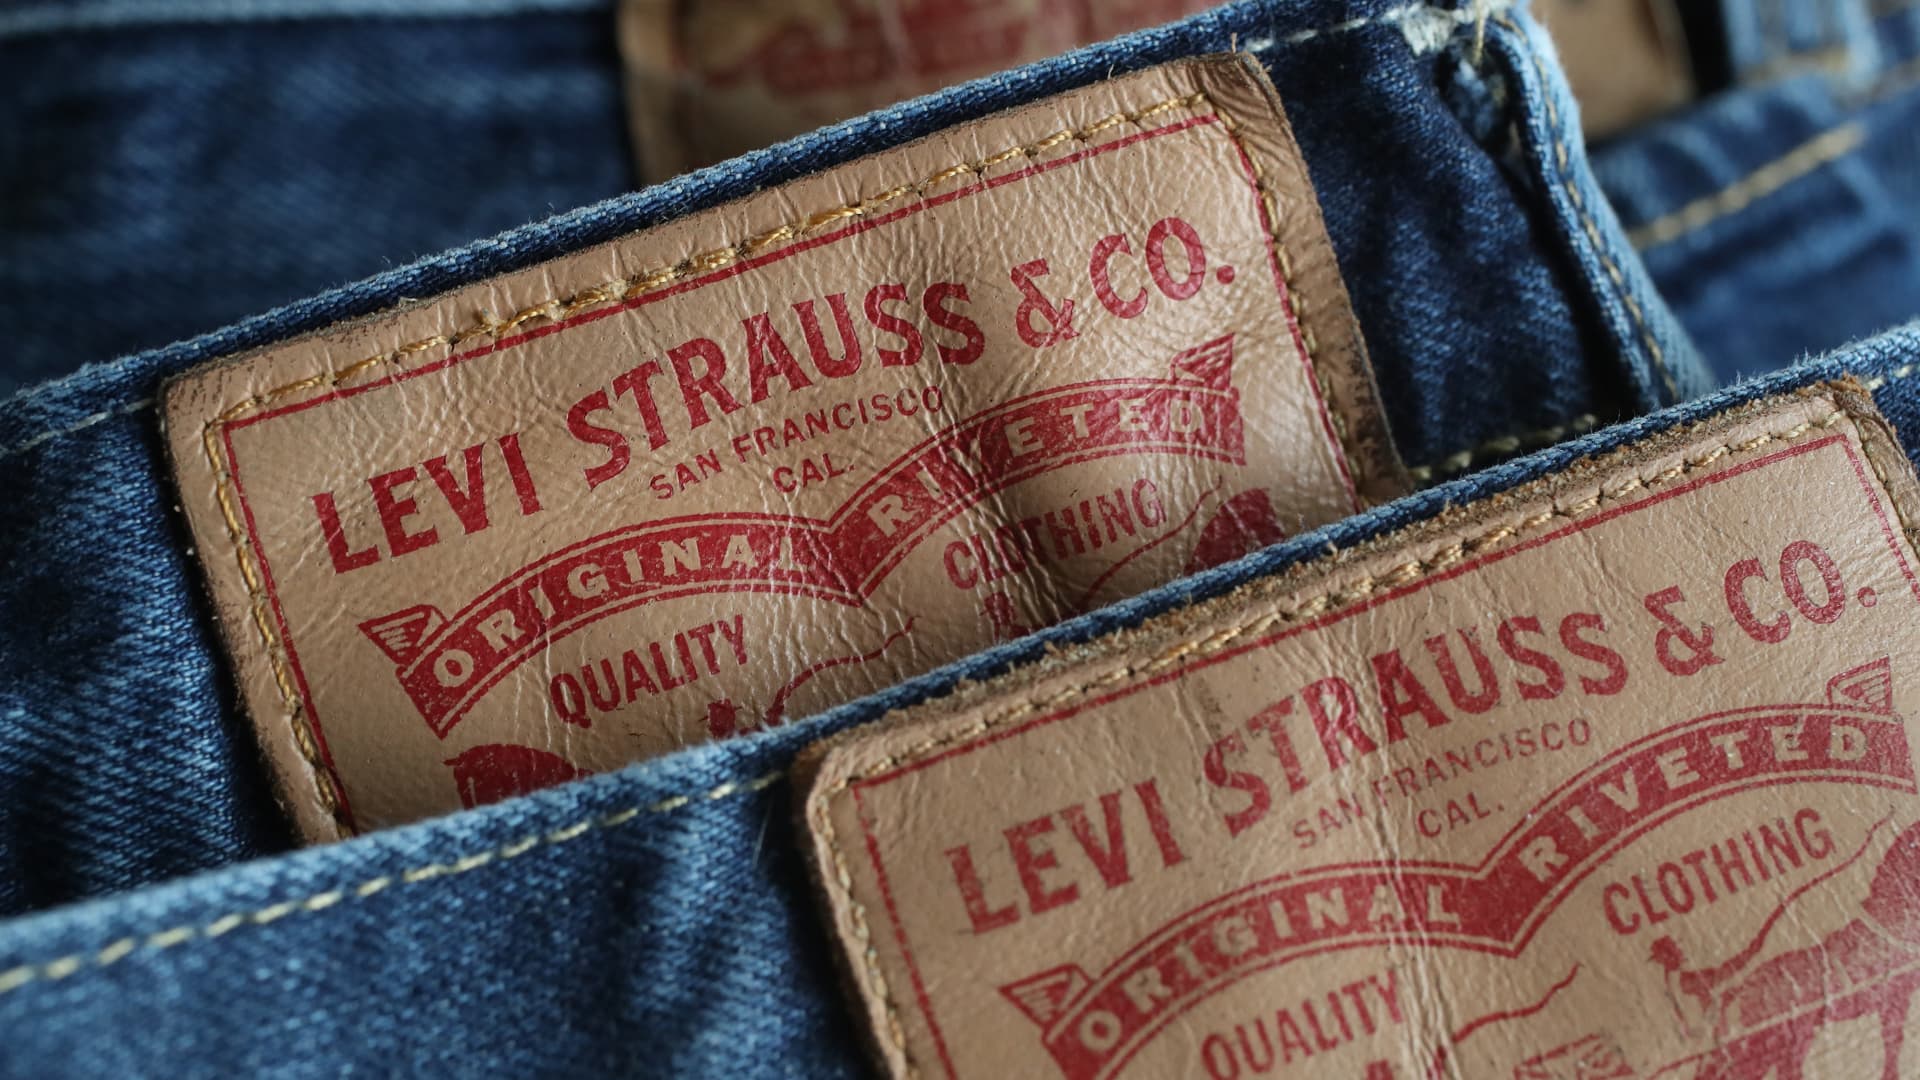 Levi Strauss cuts full-year sales forecast again, as inflation takes a toll